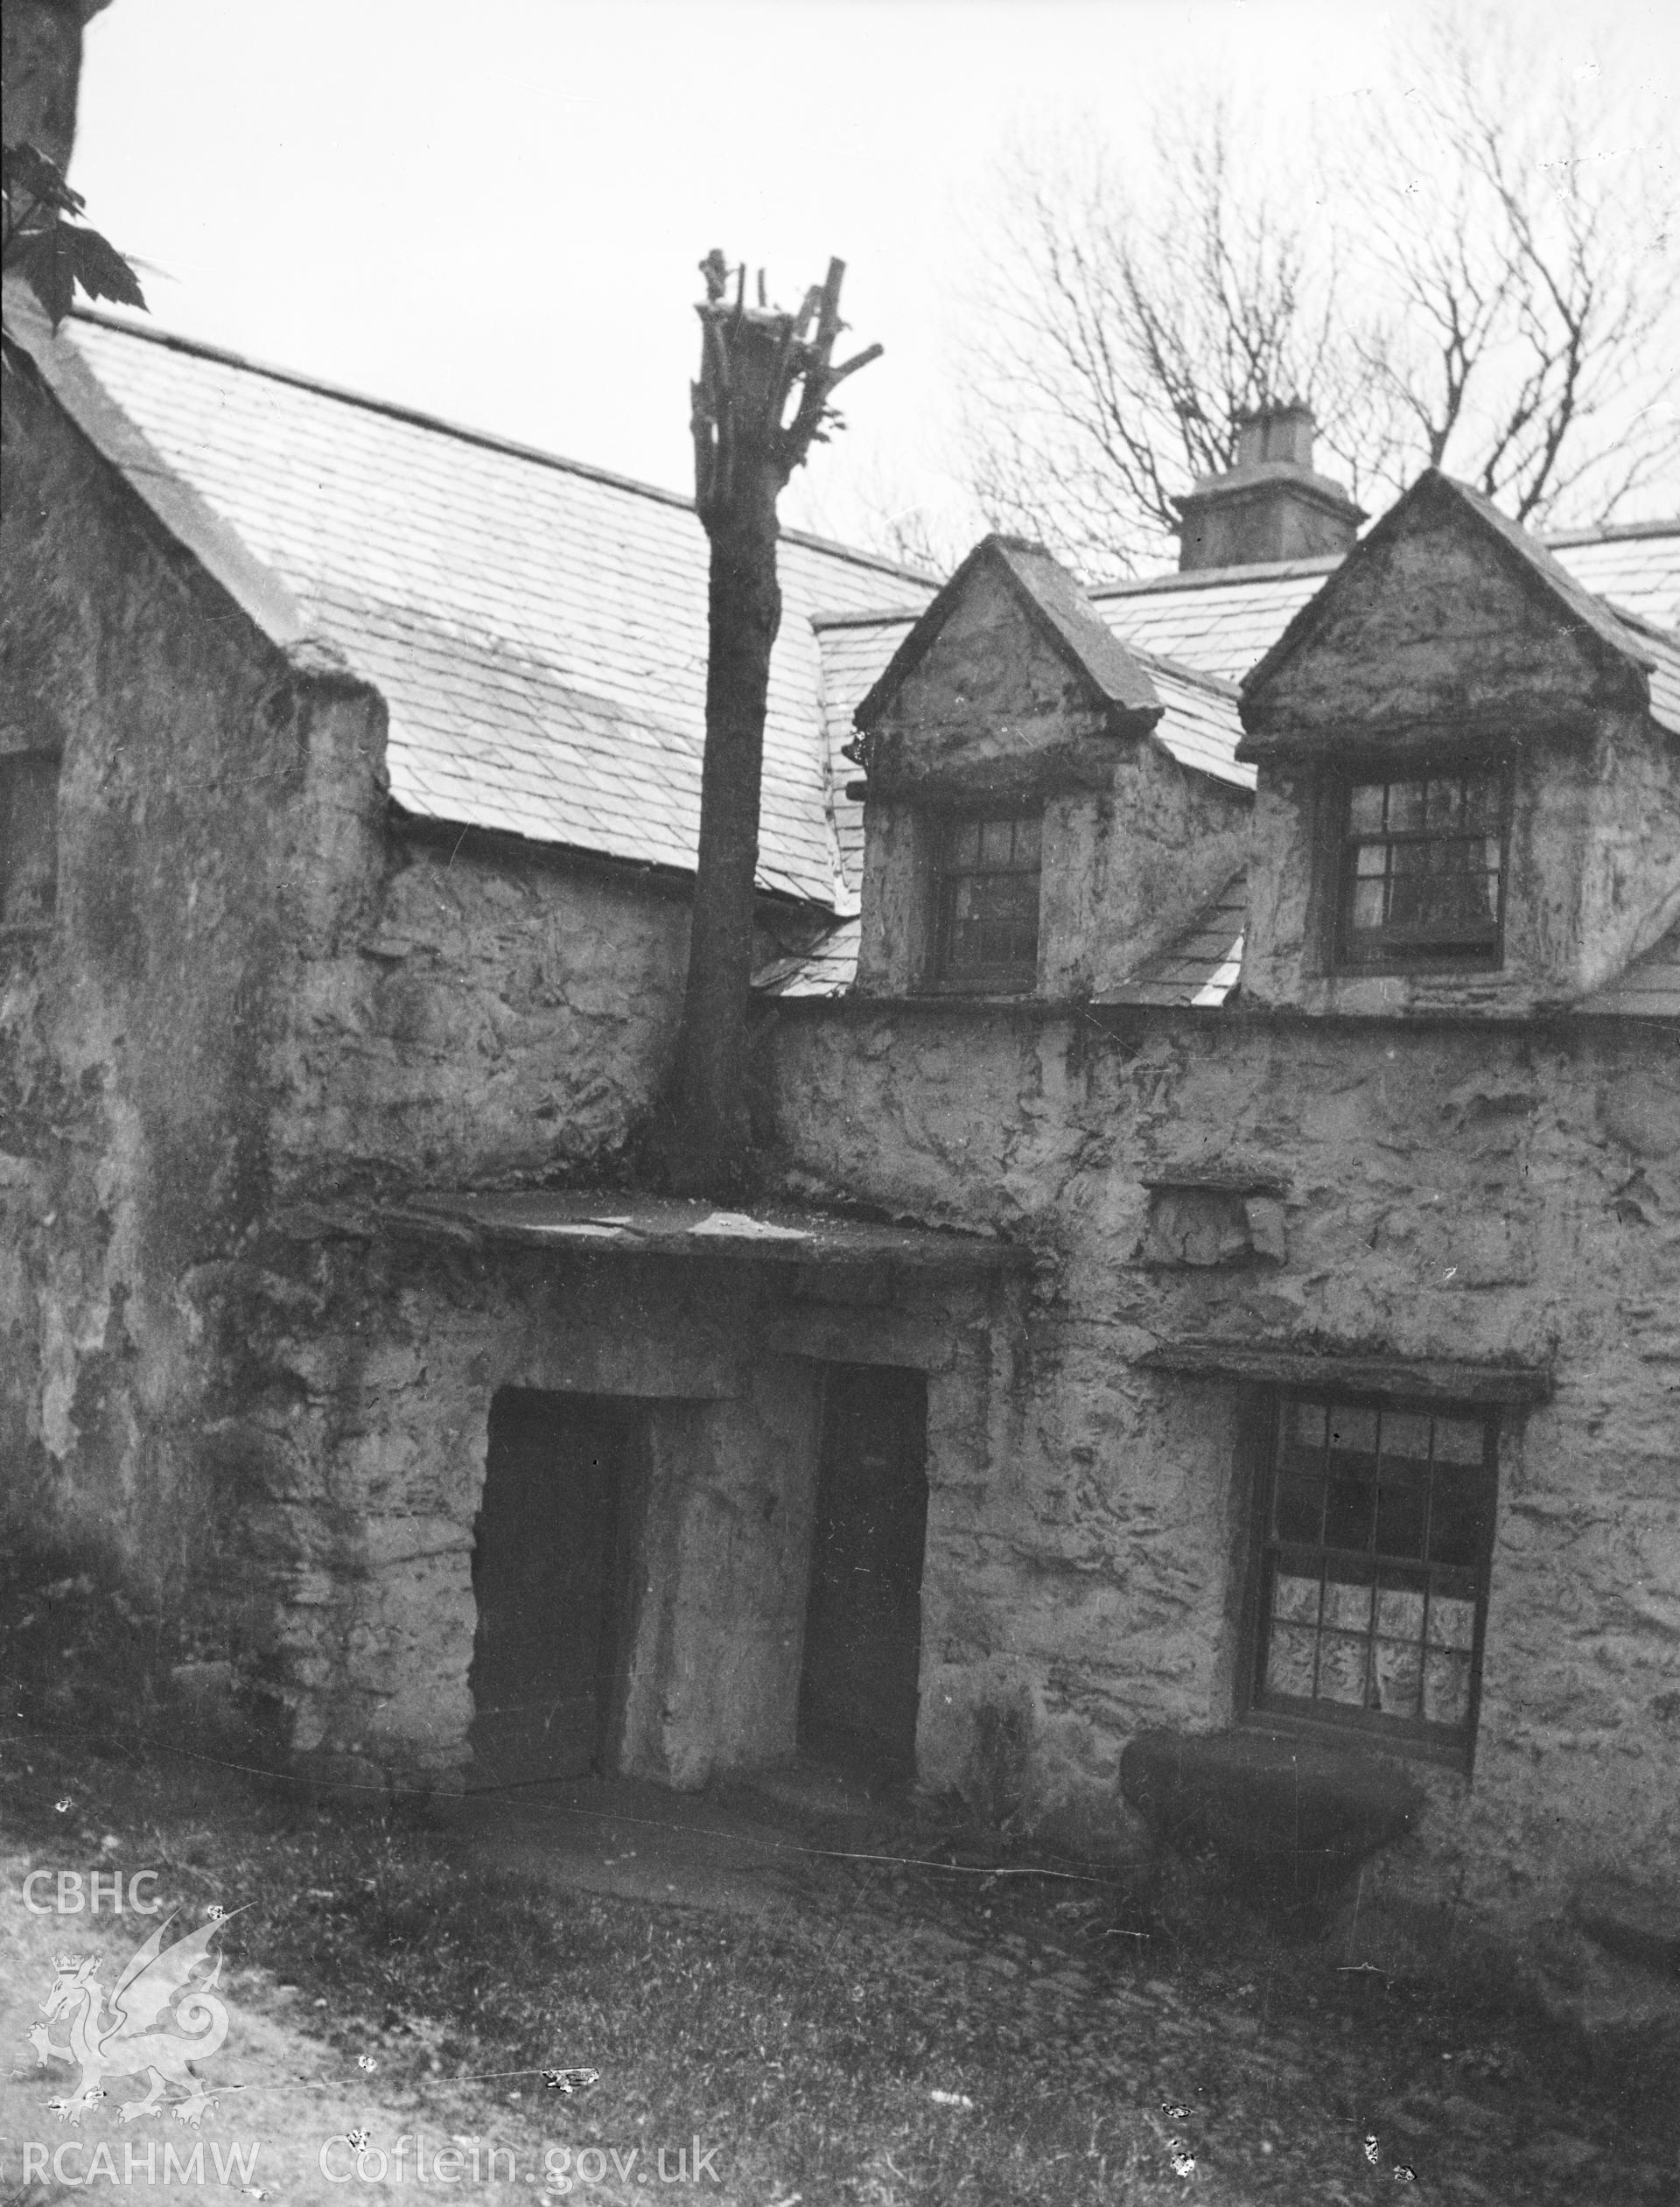 Digital copy of a nitrate negative relating to 'Old House, Clynnog'.